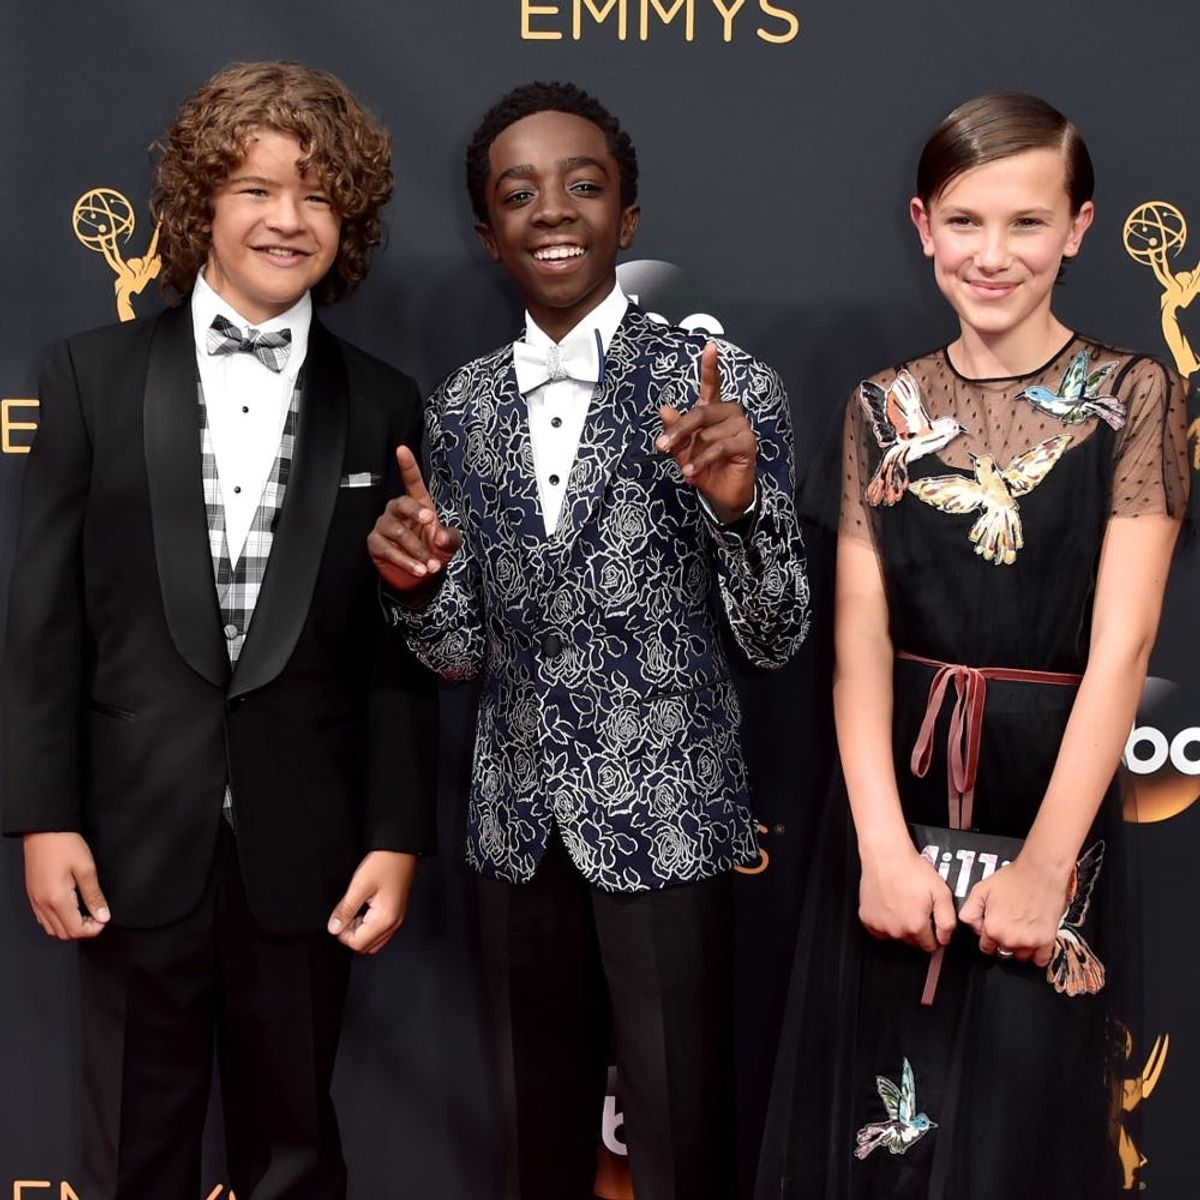 The Kids from Stranger Things Might Soon Become Your New Fave Fashion Models